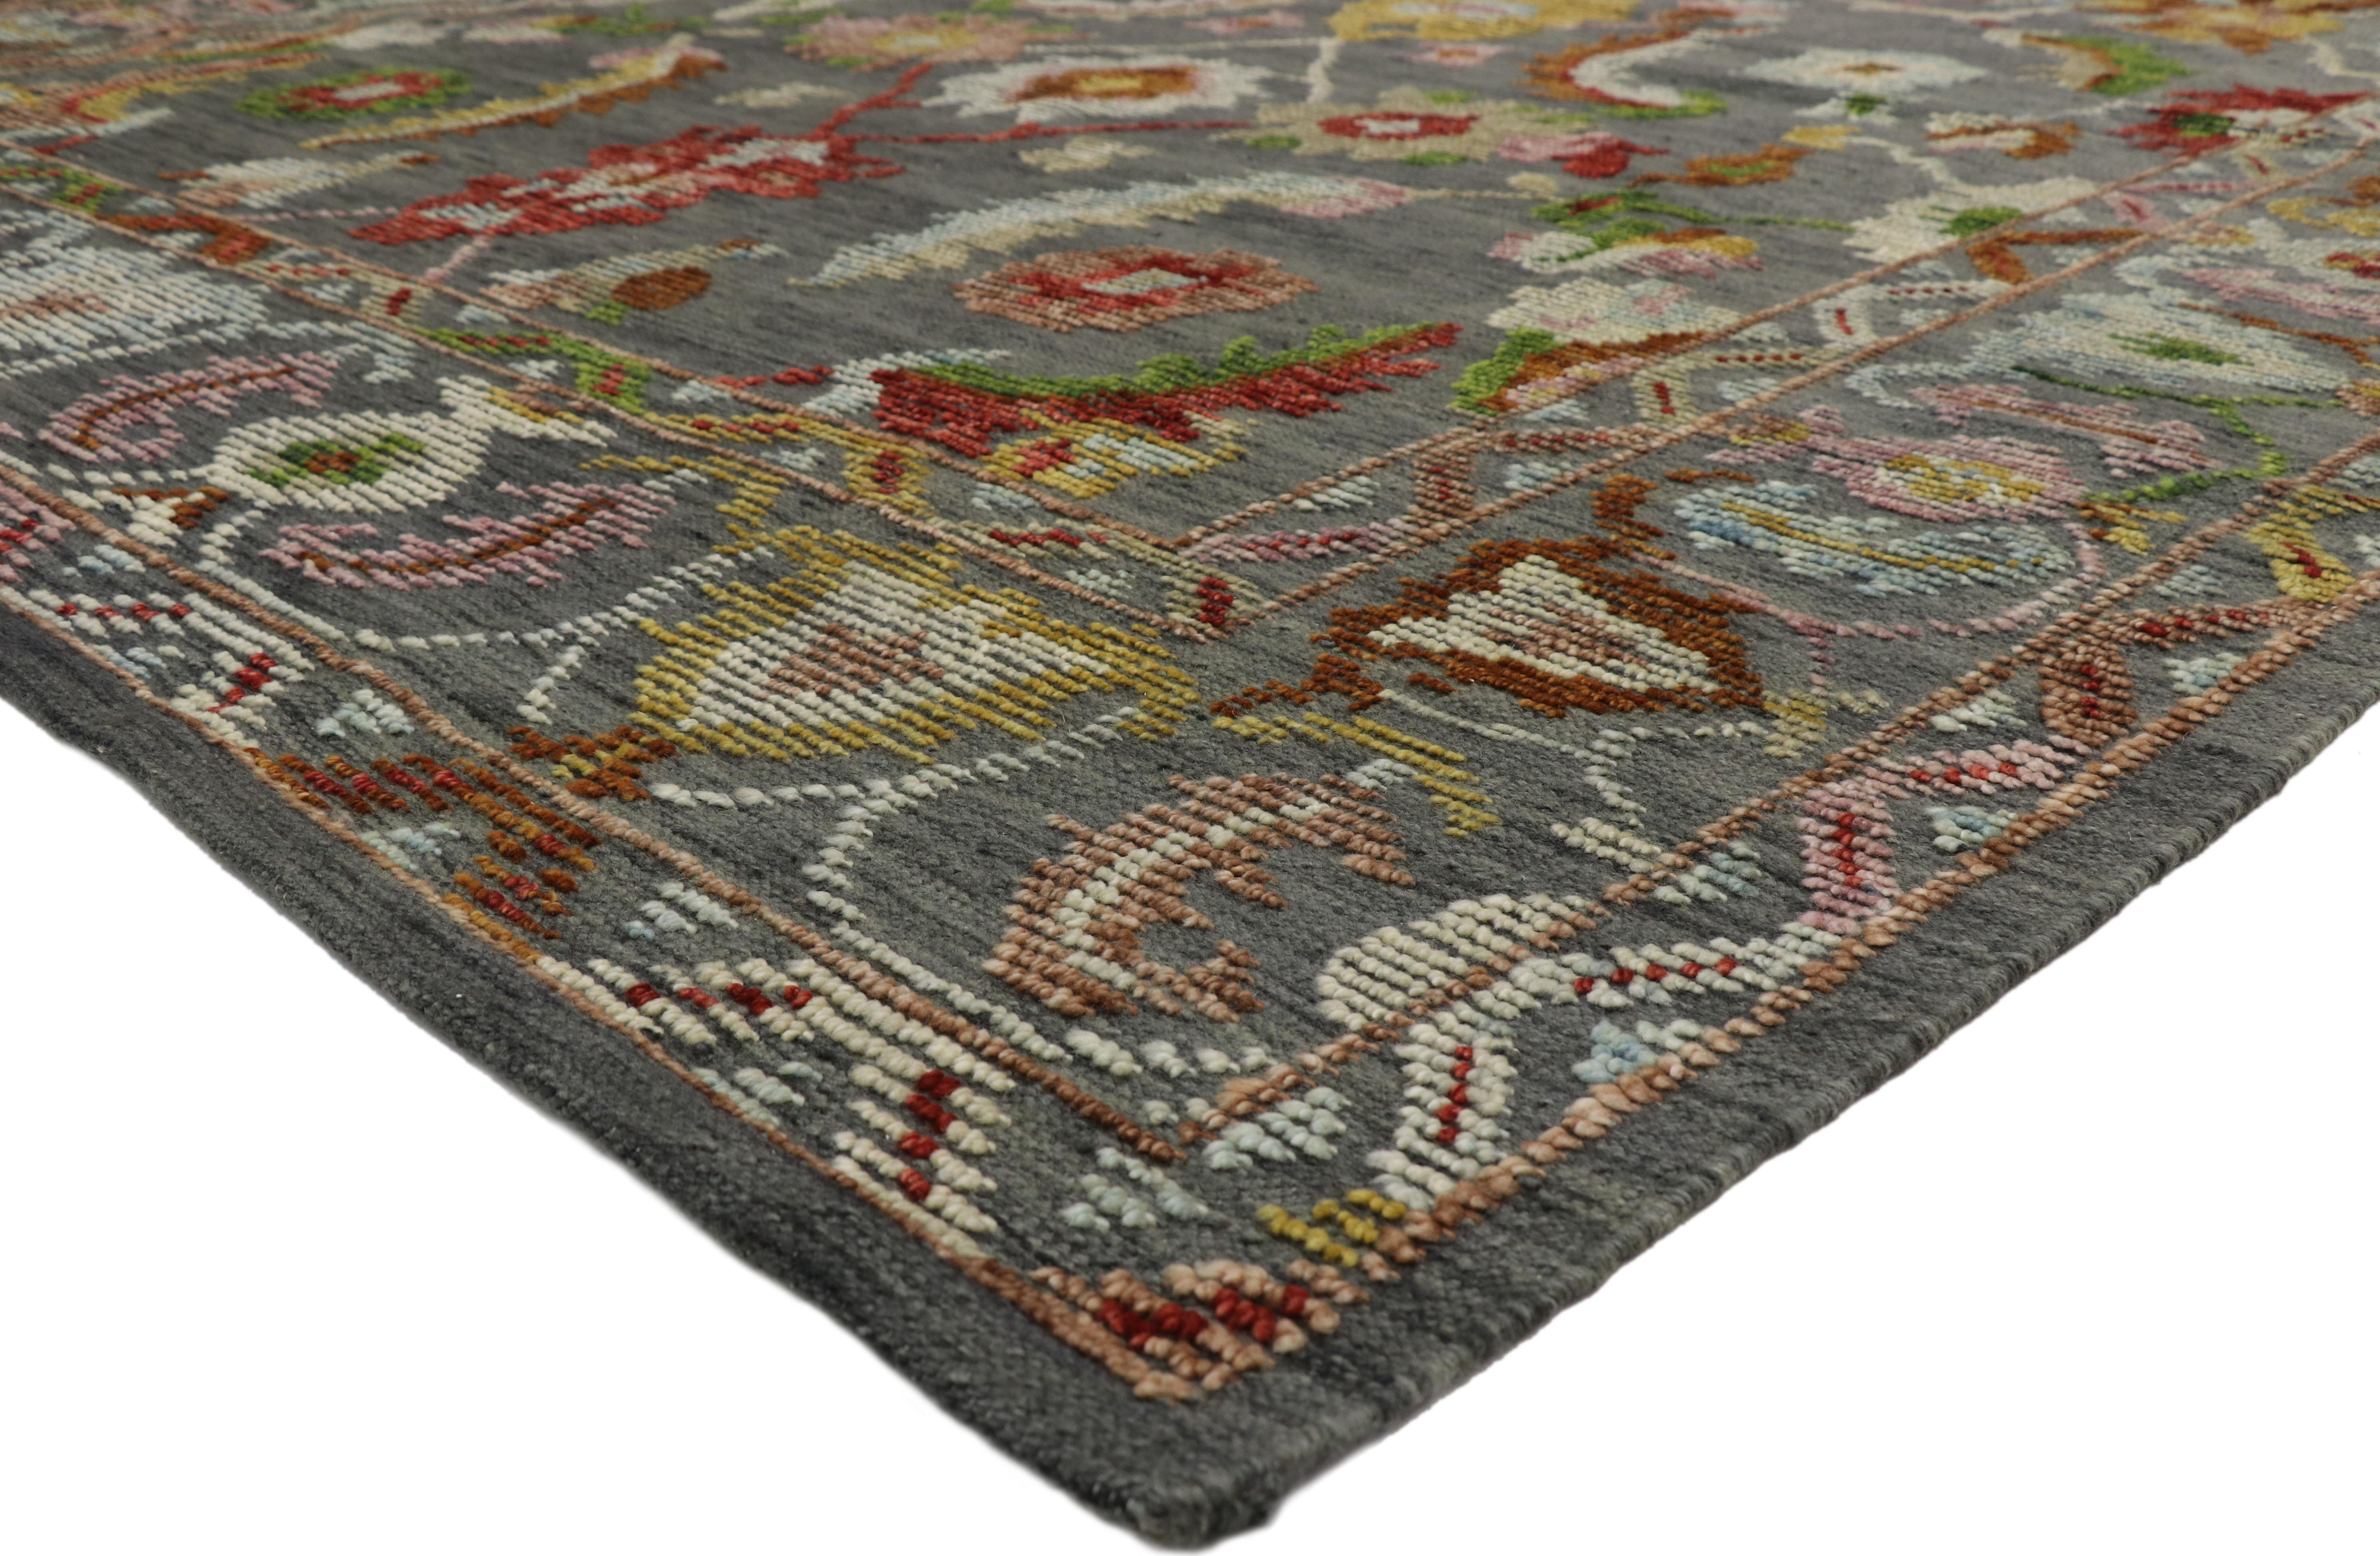 30515 new Contemporary Oushak Area rug with Modern Parisian style, Texture Area rug. Highly stylish yet tastefully casual, this new colorful Oushak style rug features an all-over raised pattern composed of Harshang-style motifs, blooming palmettes,